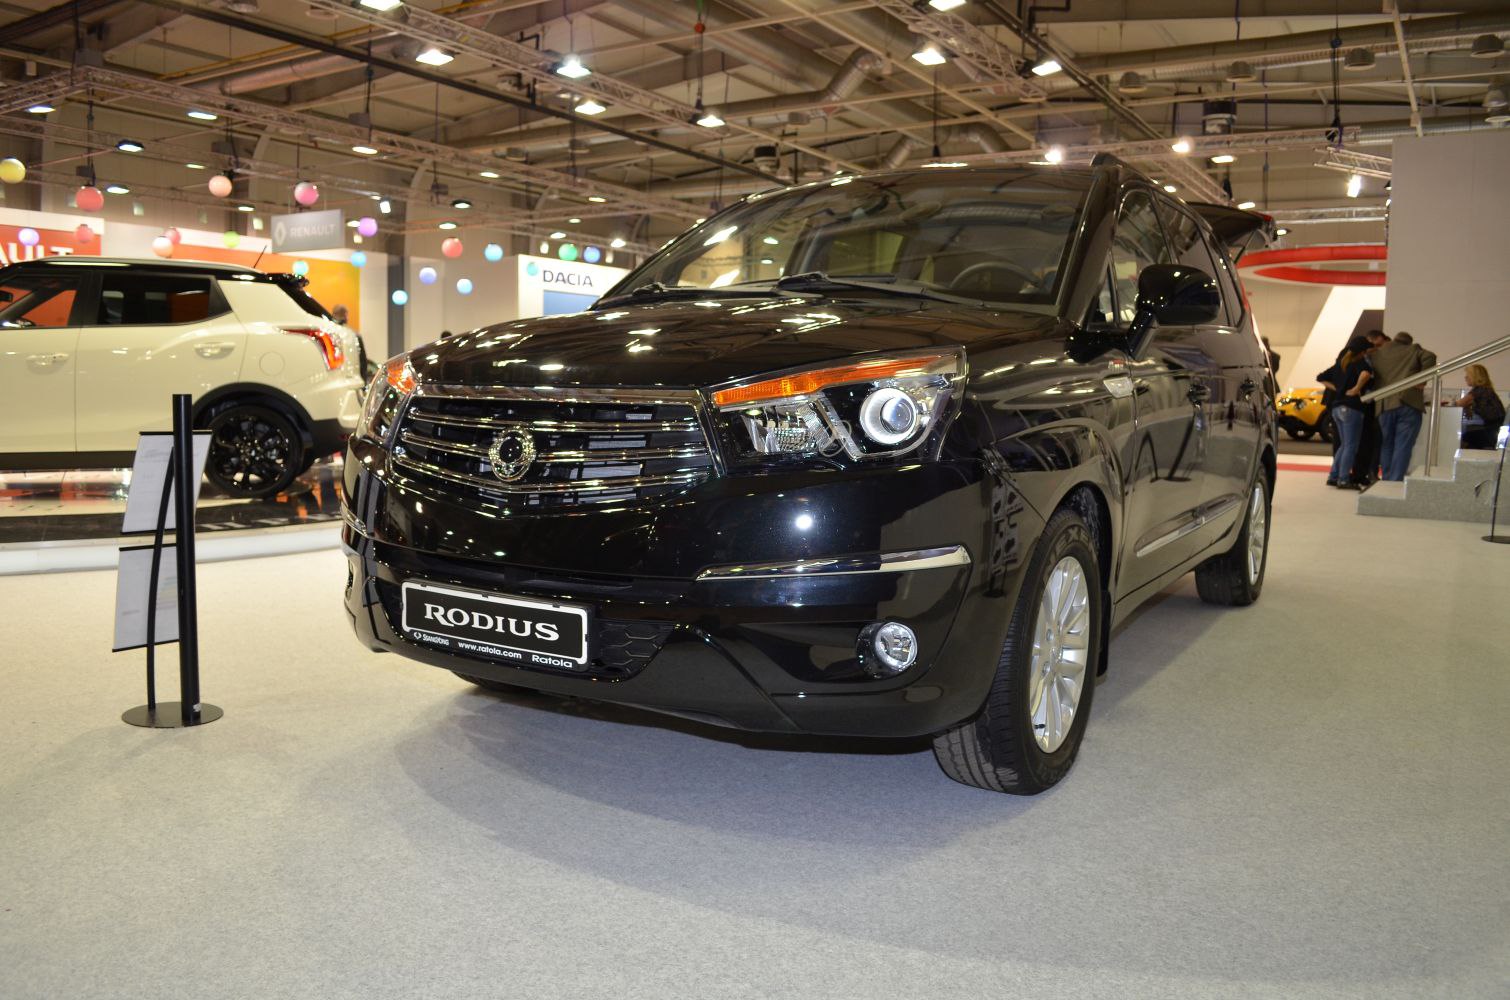 https://totalrenting.es/wp-content/uploads/2022/10/ssangyong-rodius-ii-2013-200-cdi-155-cv-4wd-automatic-minivan.png